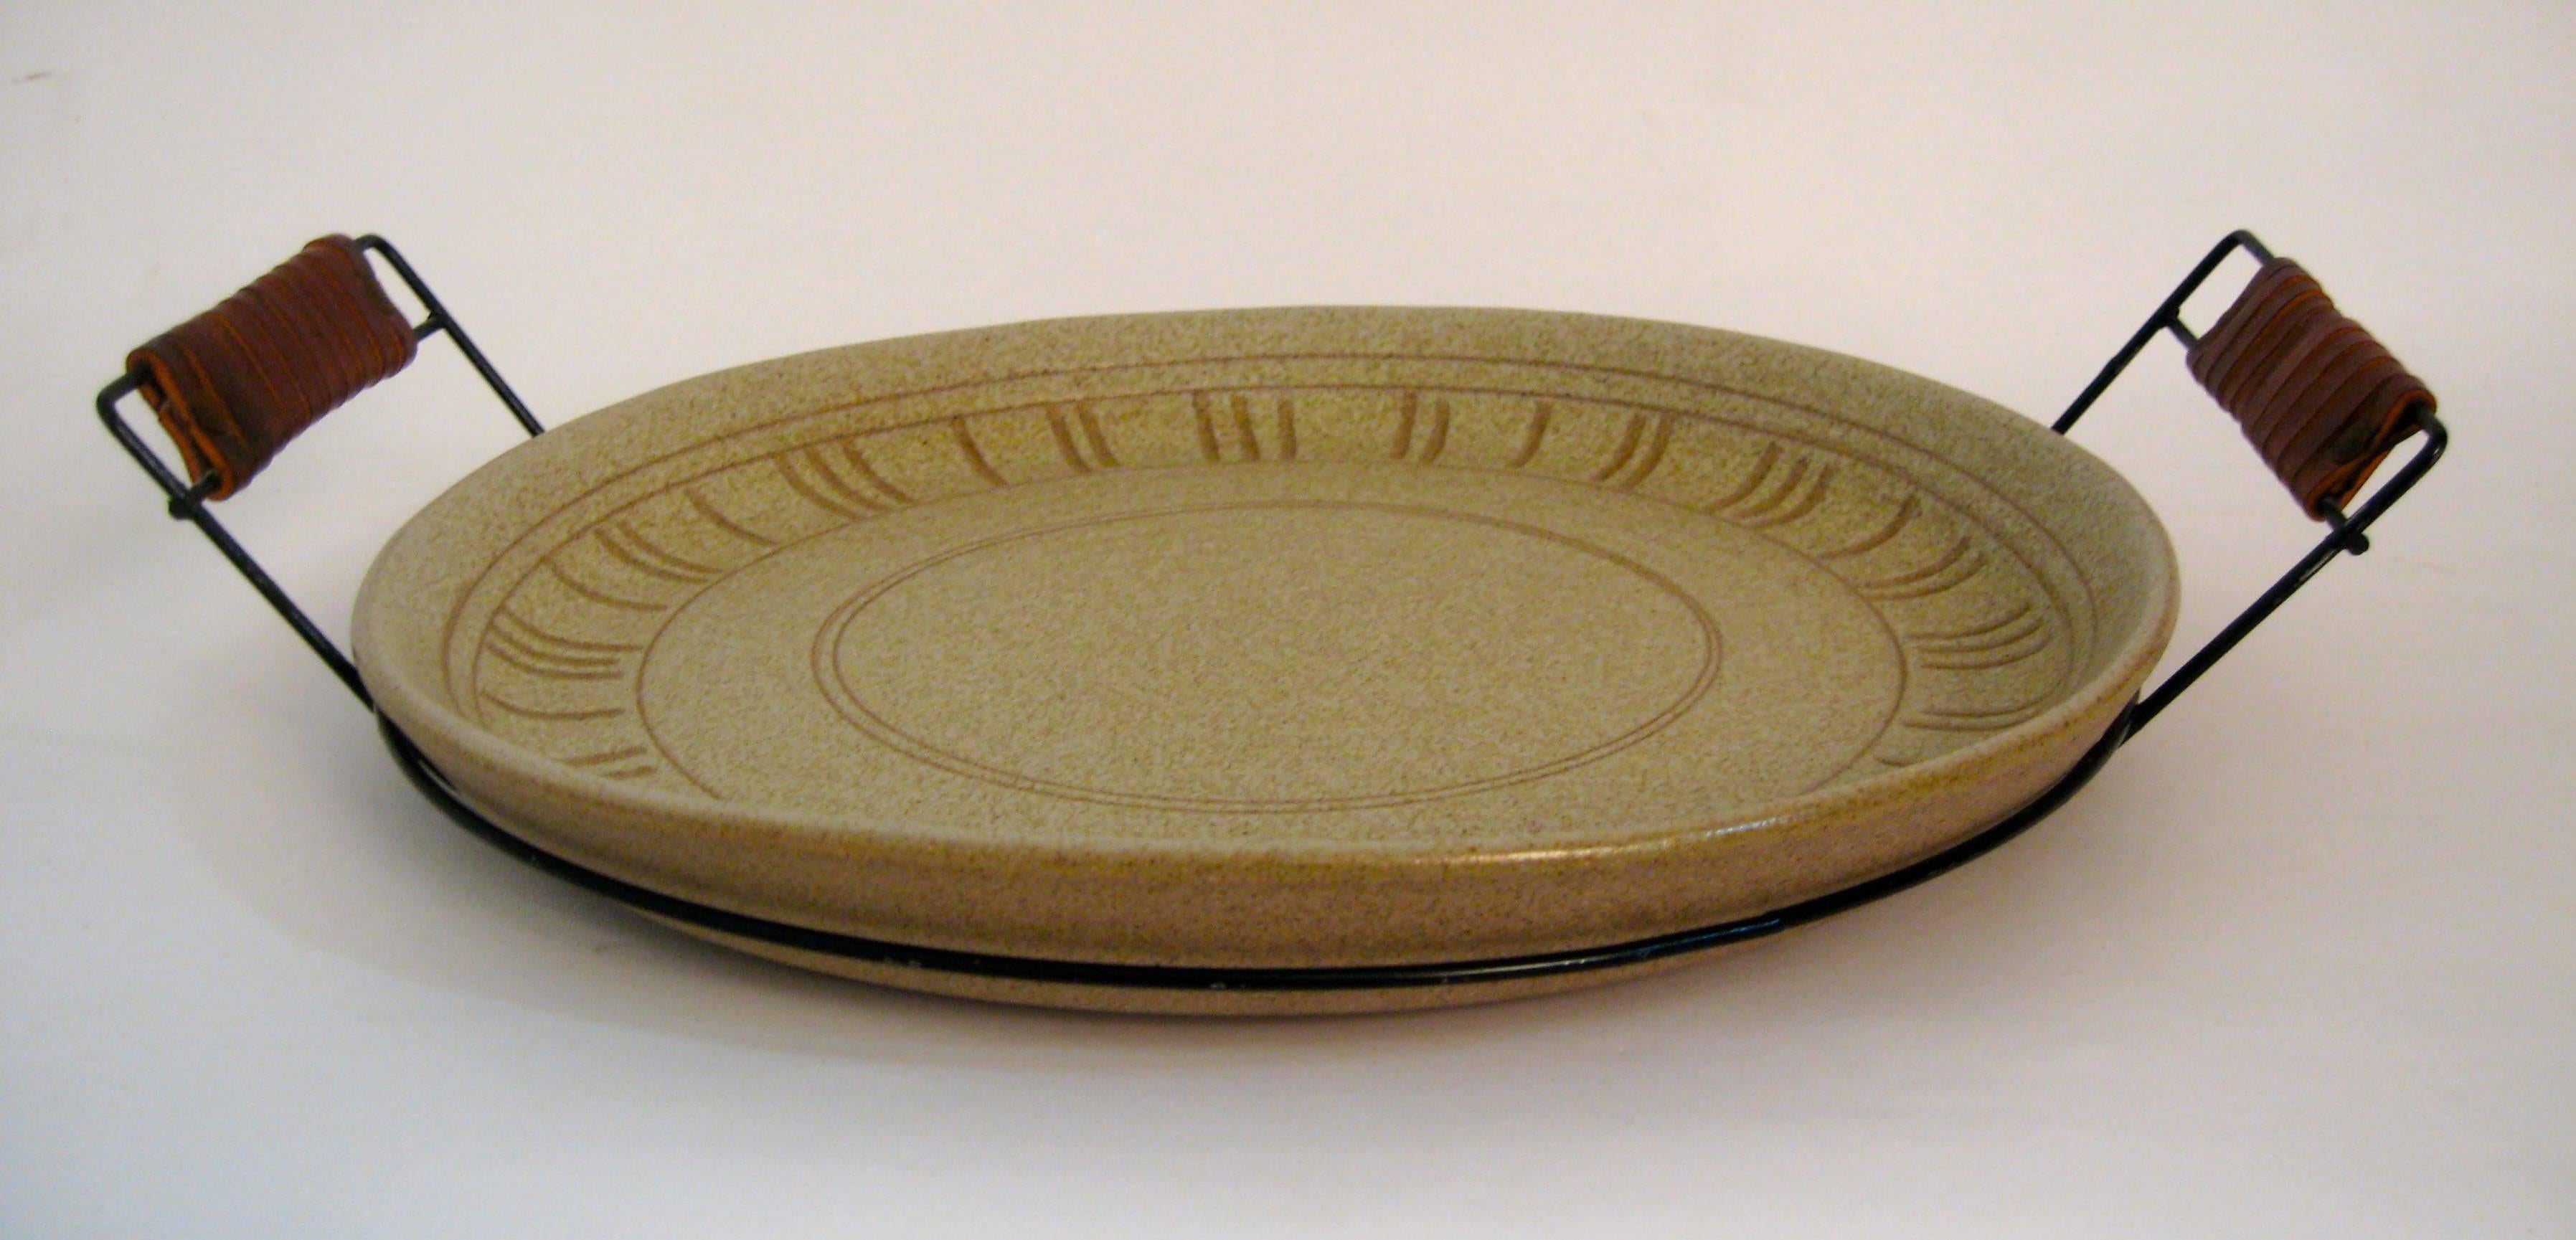 Wonderful and rare form signed Gordon Martz serving platter centrepiece. Large matte glazed pottery dish with a metal wire and leather wrapped handle caddy. Incised line motif decorated edge in a speckled tan glaze. Excellent, original condition.